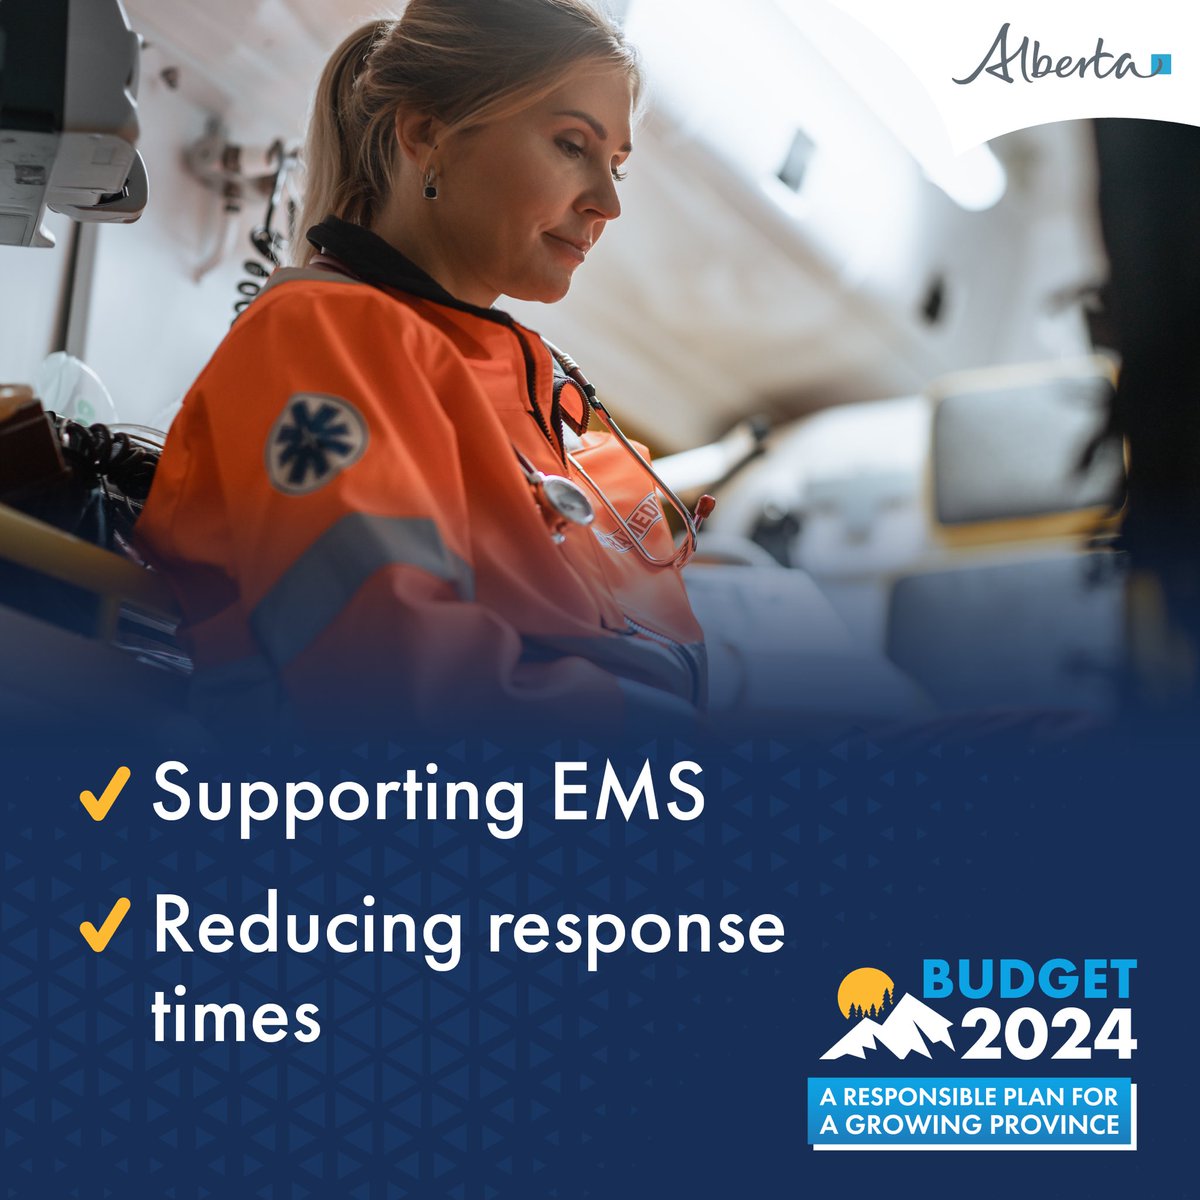 Budget 2024 invests in reducing emergency response times, increasing emergency medical services capacity and supporting the paramedic workforce across the province. Alberta’s government is dedicated to improving emergency response time and services, ensuring swift access to